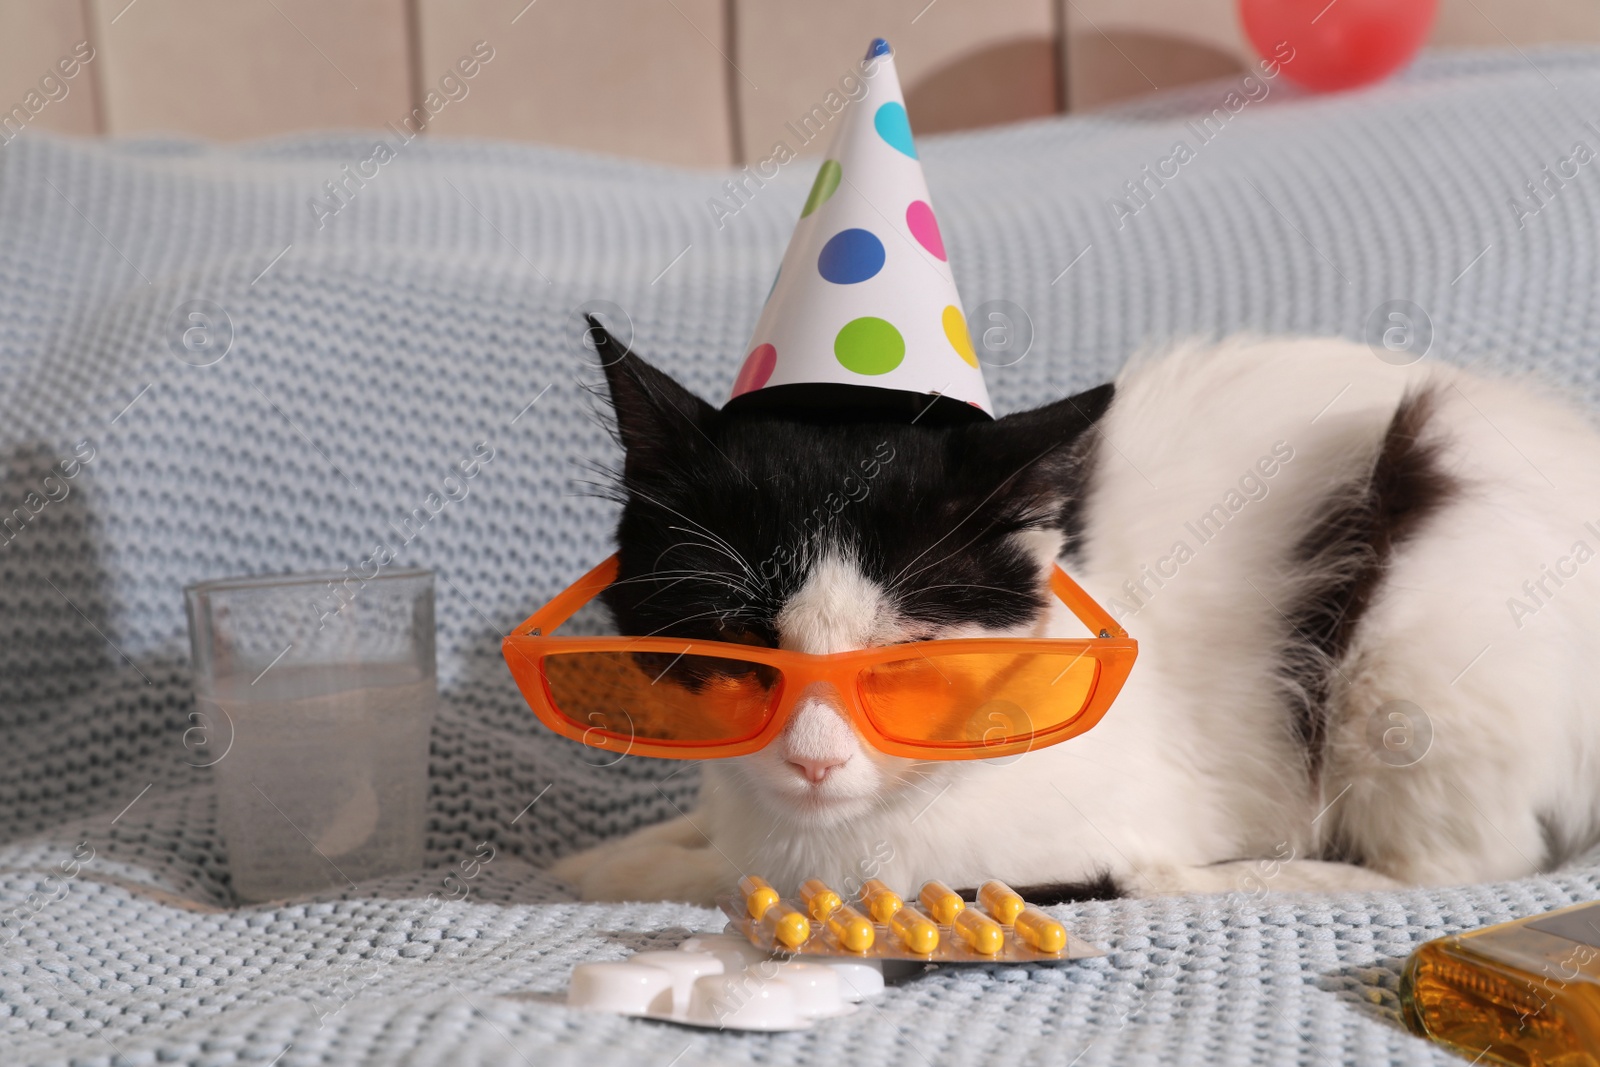 Photo of Cute cat wearing birthday hat and sunglasses near hangover medicines on bed